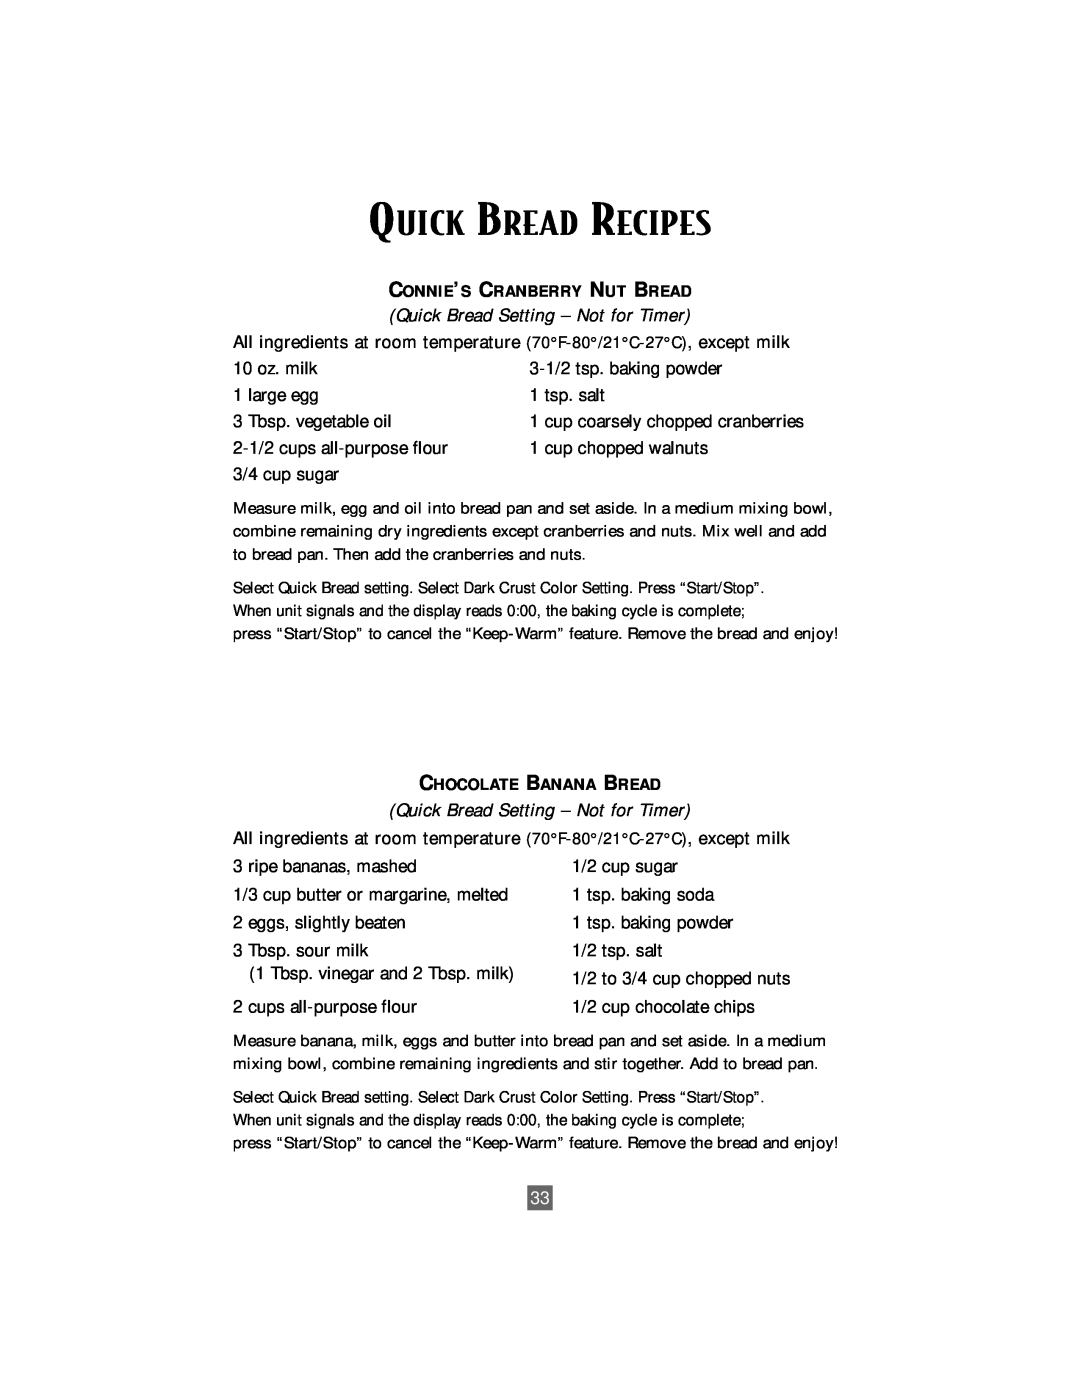 Oster P. N. 101017 manual Quick Bread Recipes, Quick Bread Setting - Not for Timer, Connie’S Cranberry Nut Bread 